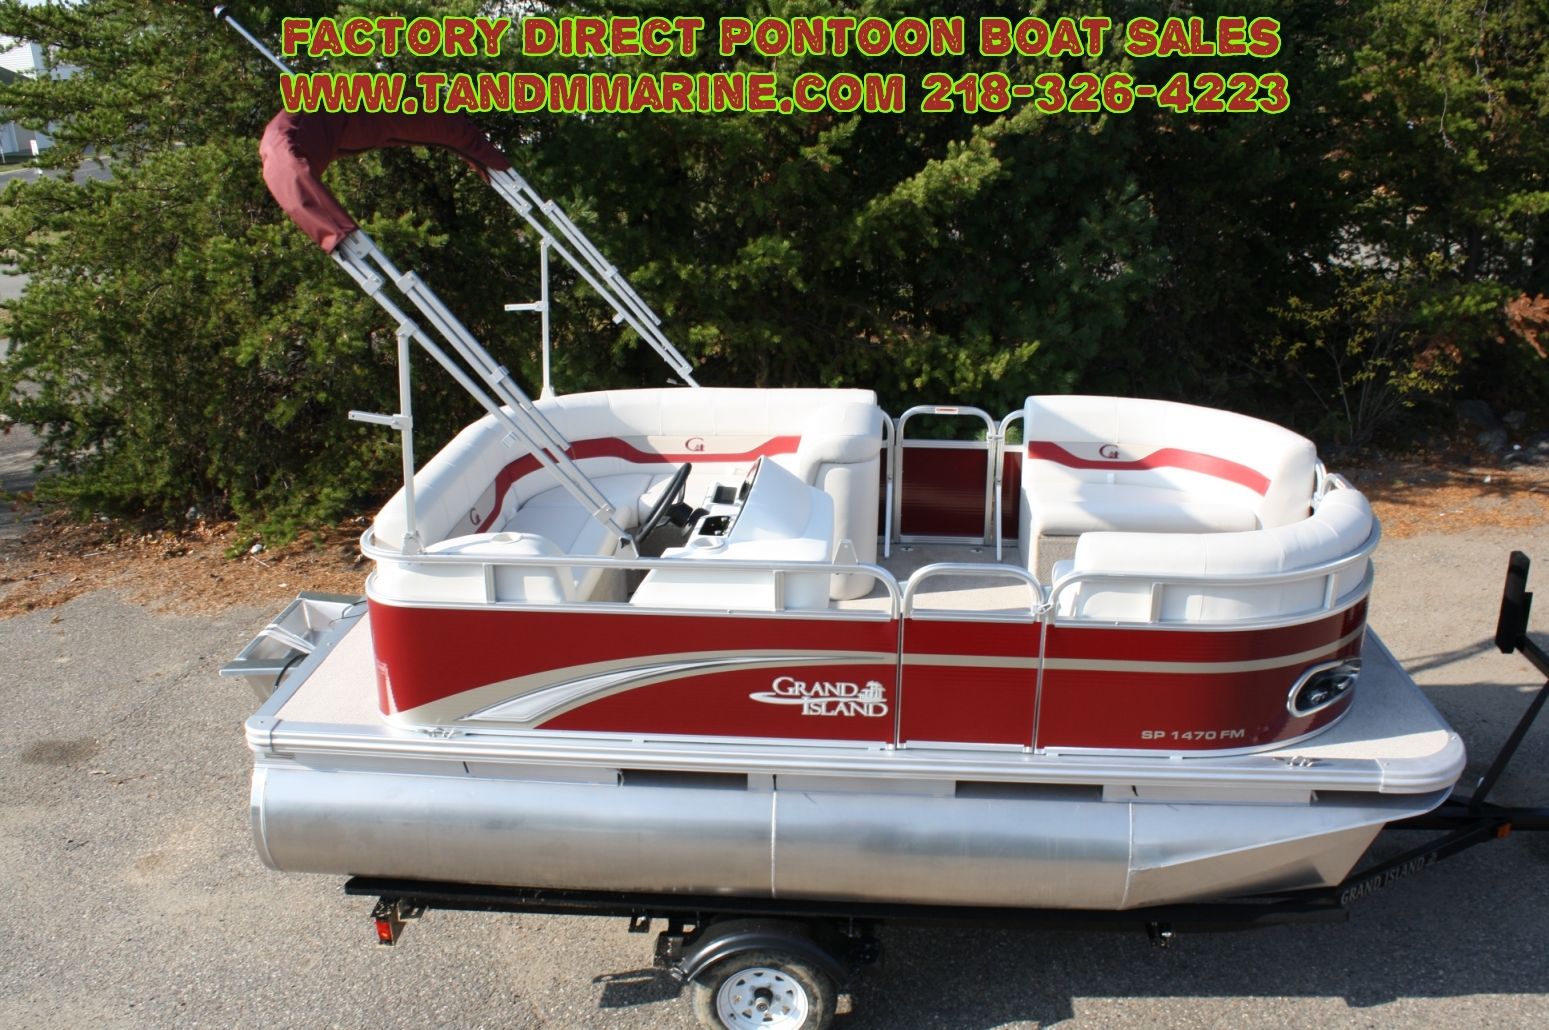 Grand Island 14 Cruise 2015 for sale for $12,999 - Boats ...